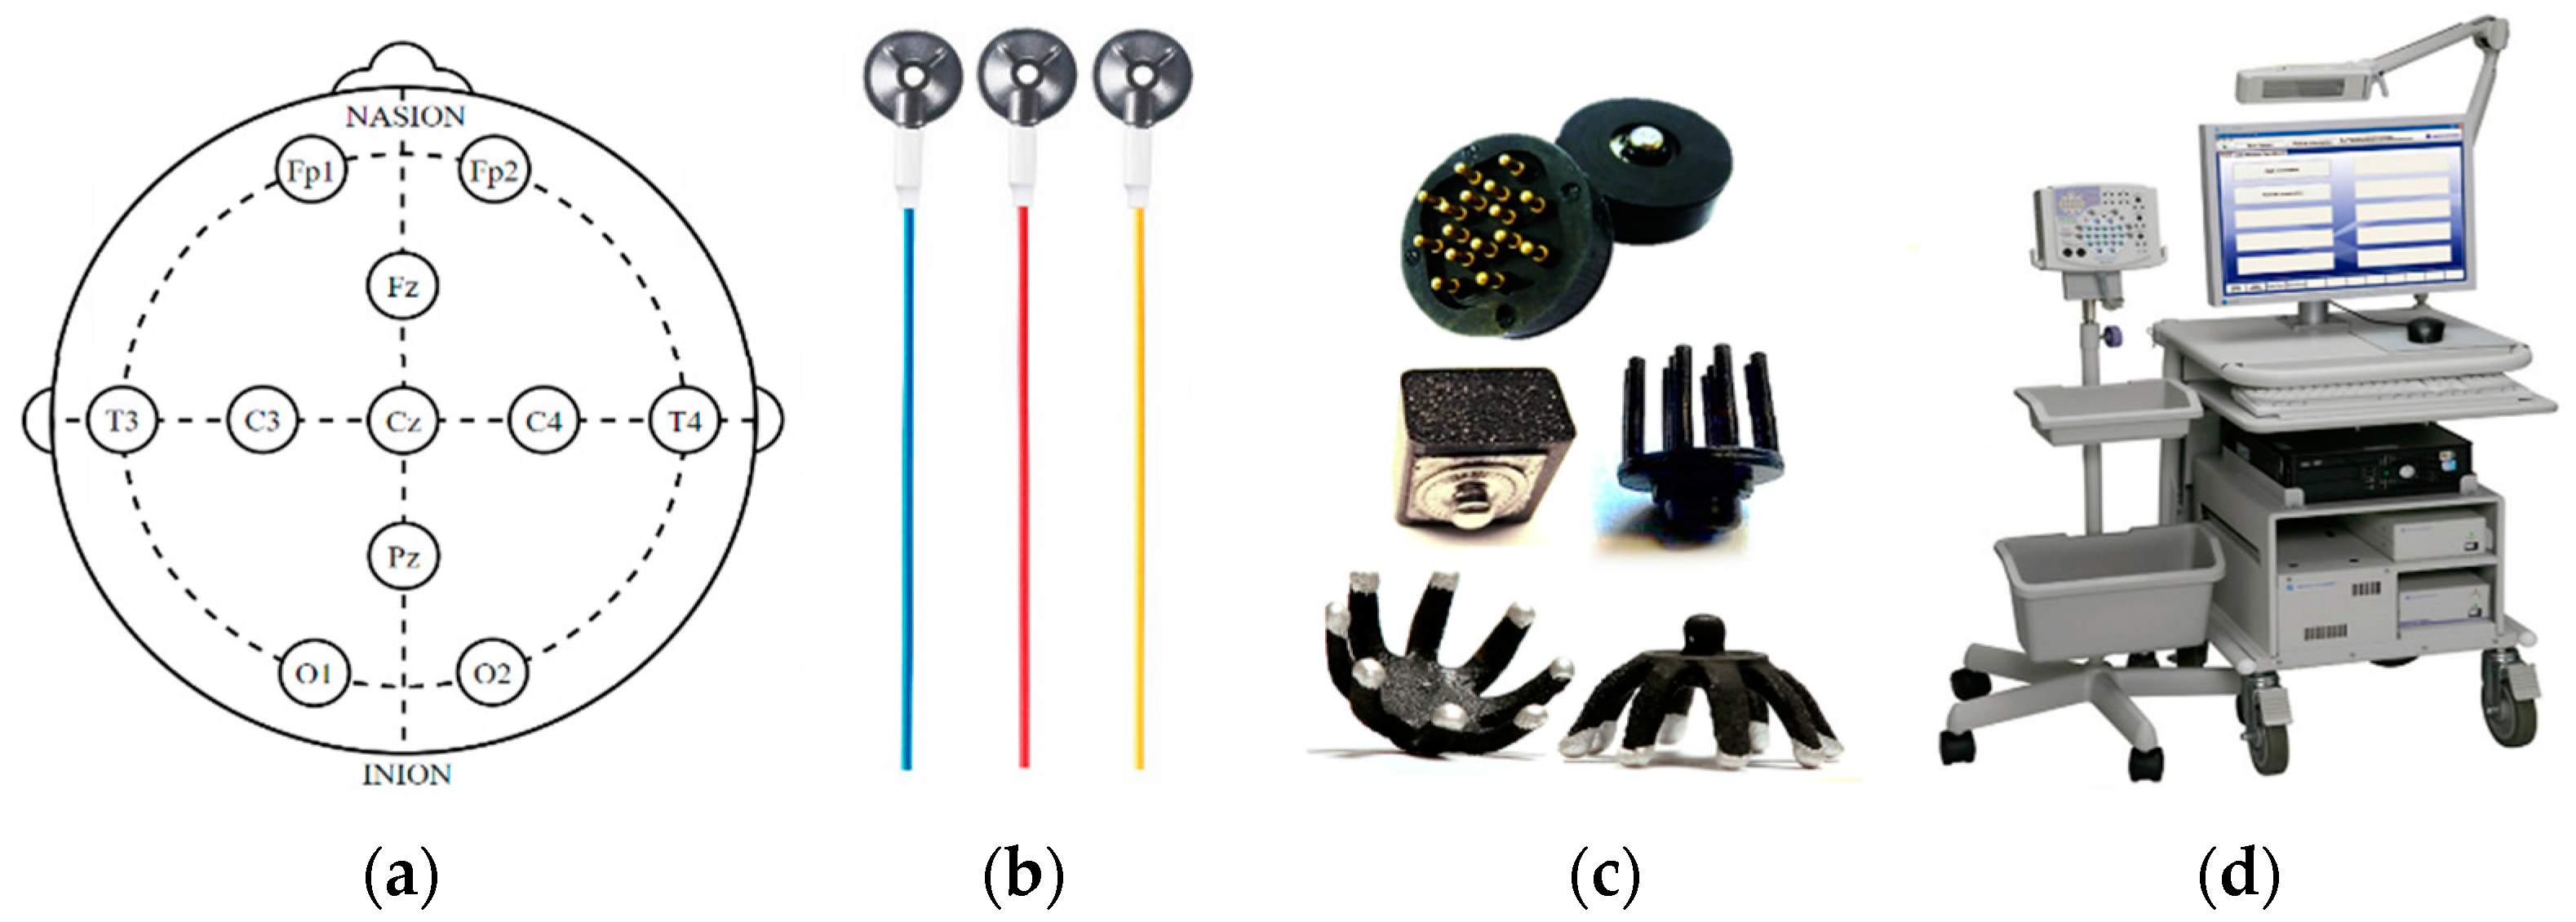 Sensors | Free Full-Text | Analysis of a Low-Cost EEG Monitoring System and  Dry Electrodes toward Clinical Use in the Neonatal ICU